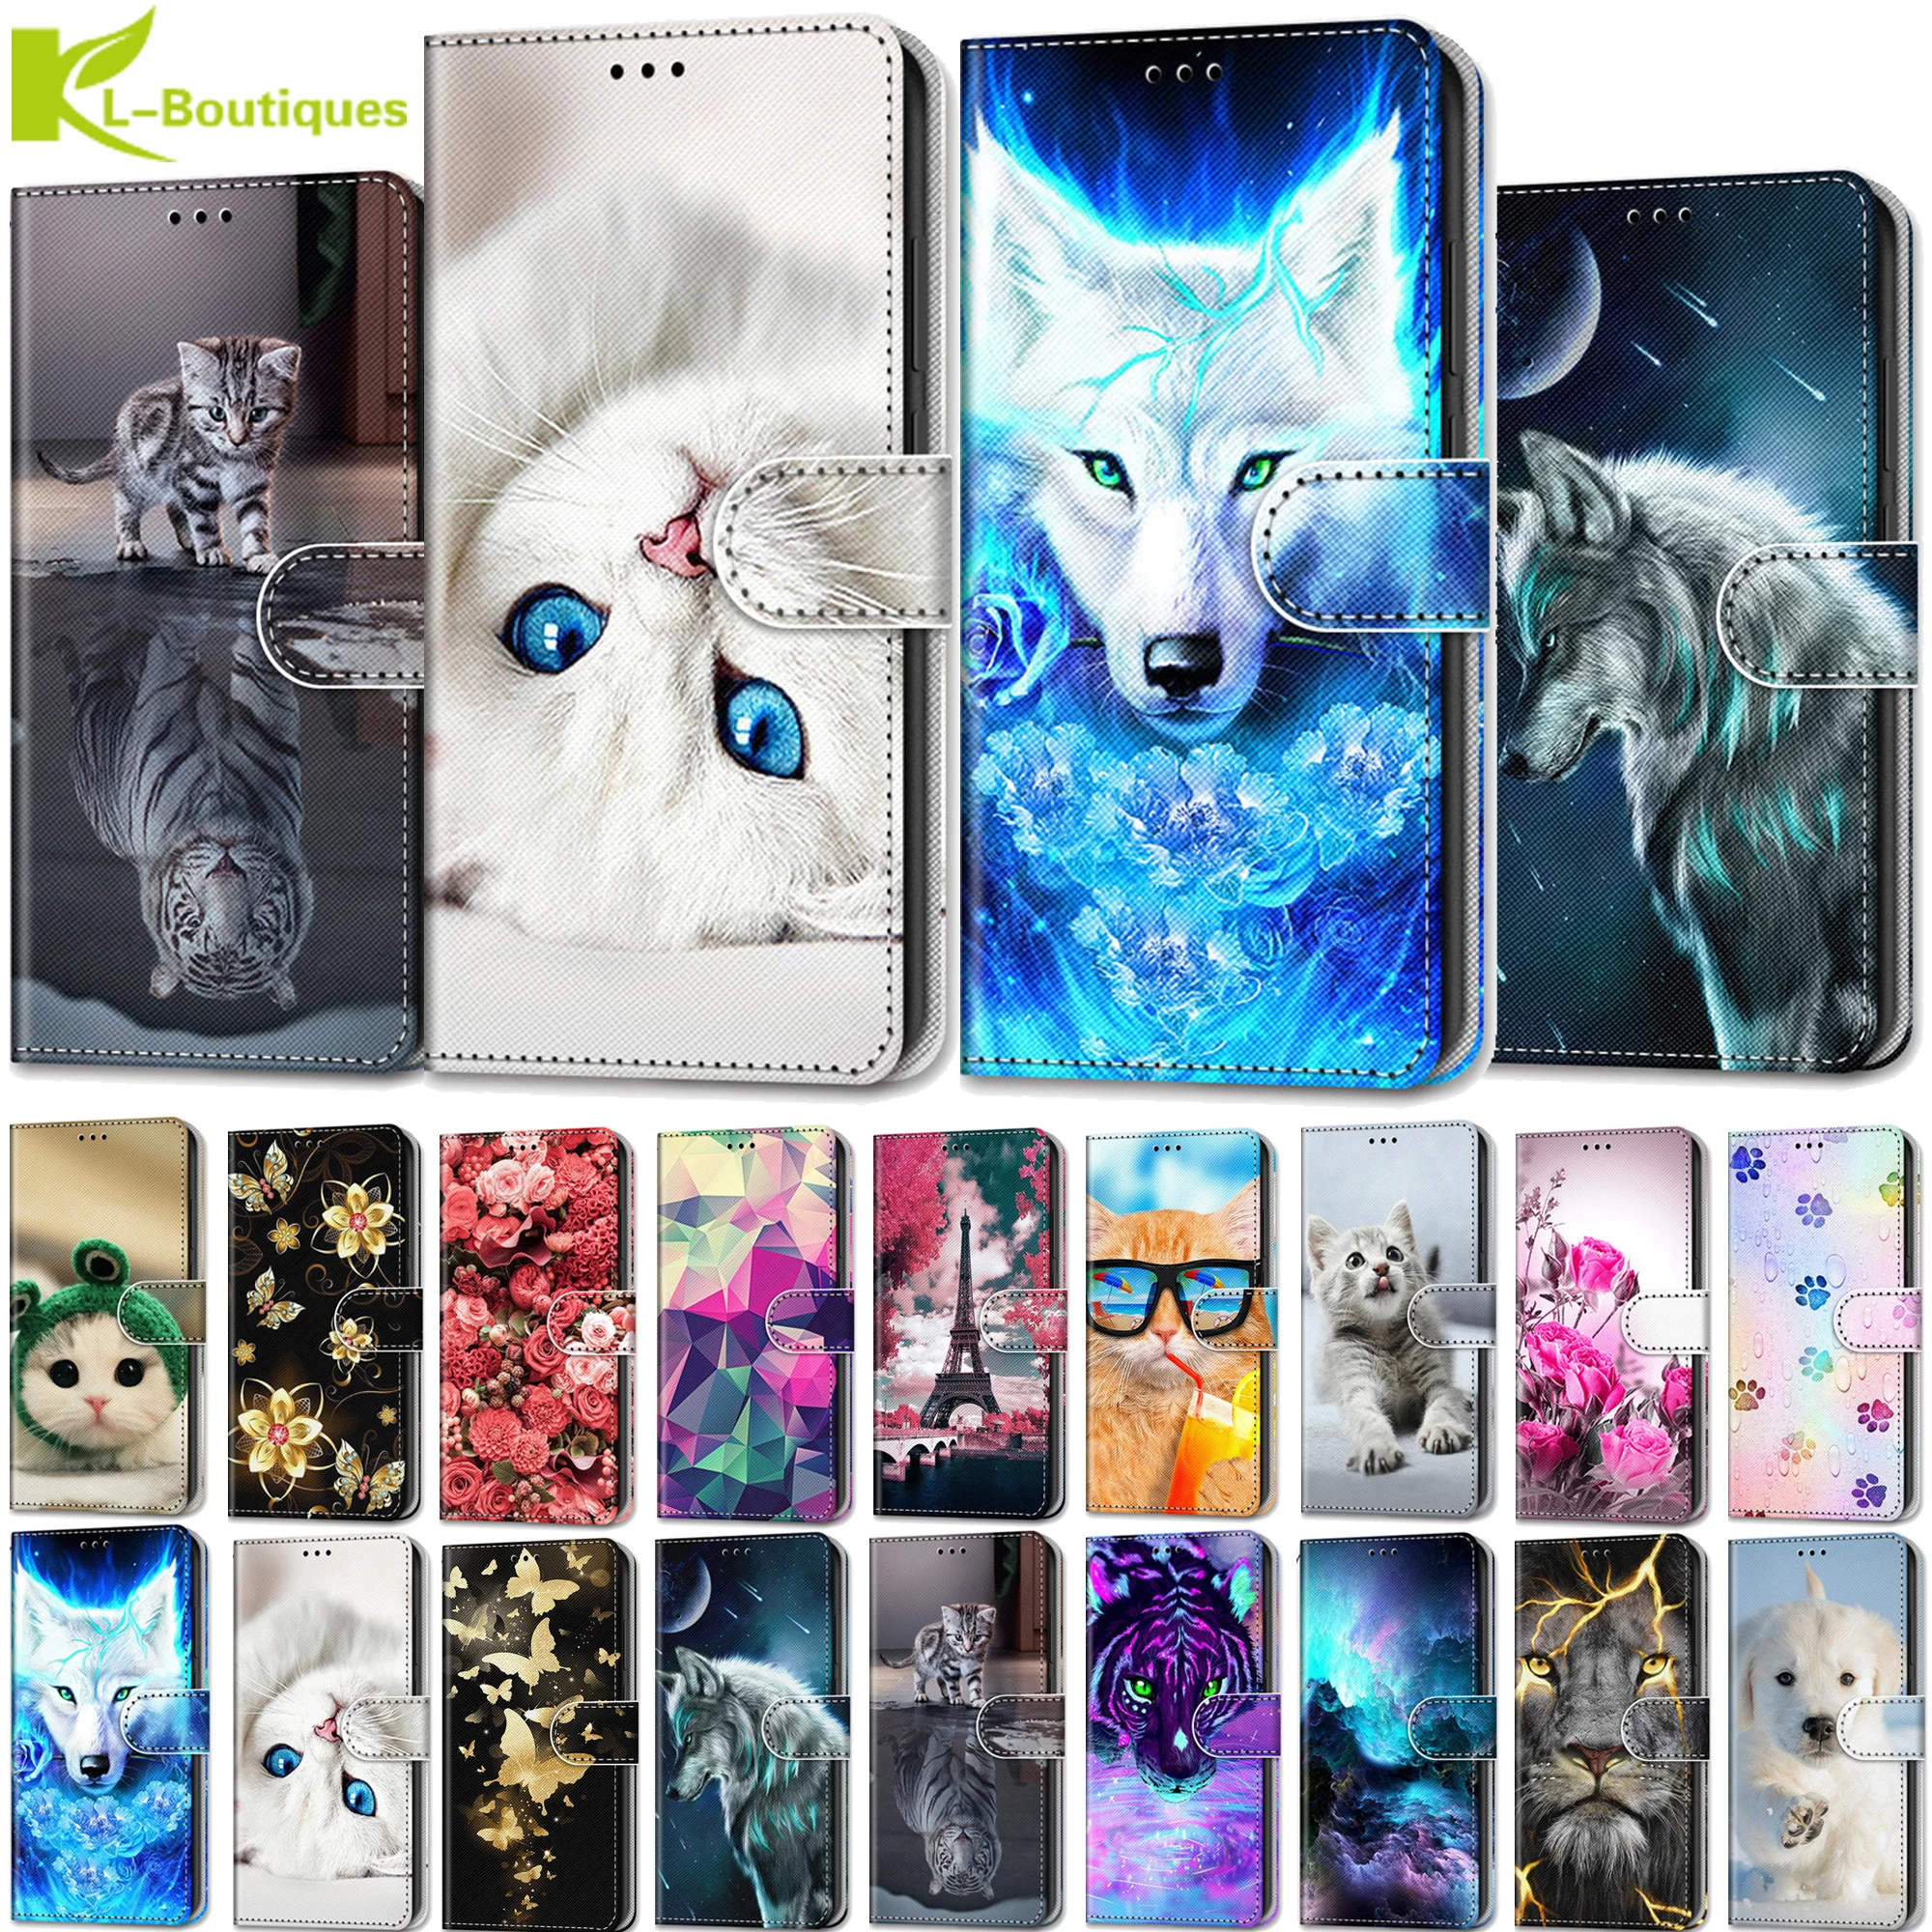 

S20 Ultra case etui leather wallet cover for Samsung Galaxy S20 Plus A01 21 51 71 A10 20 30 50 S A20E painted protect phone case